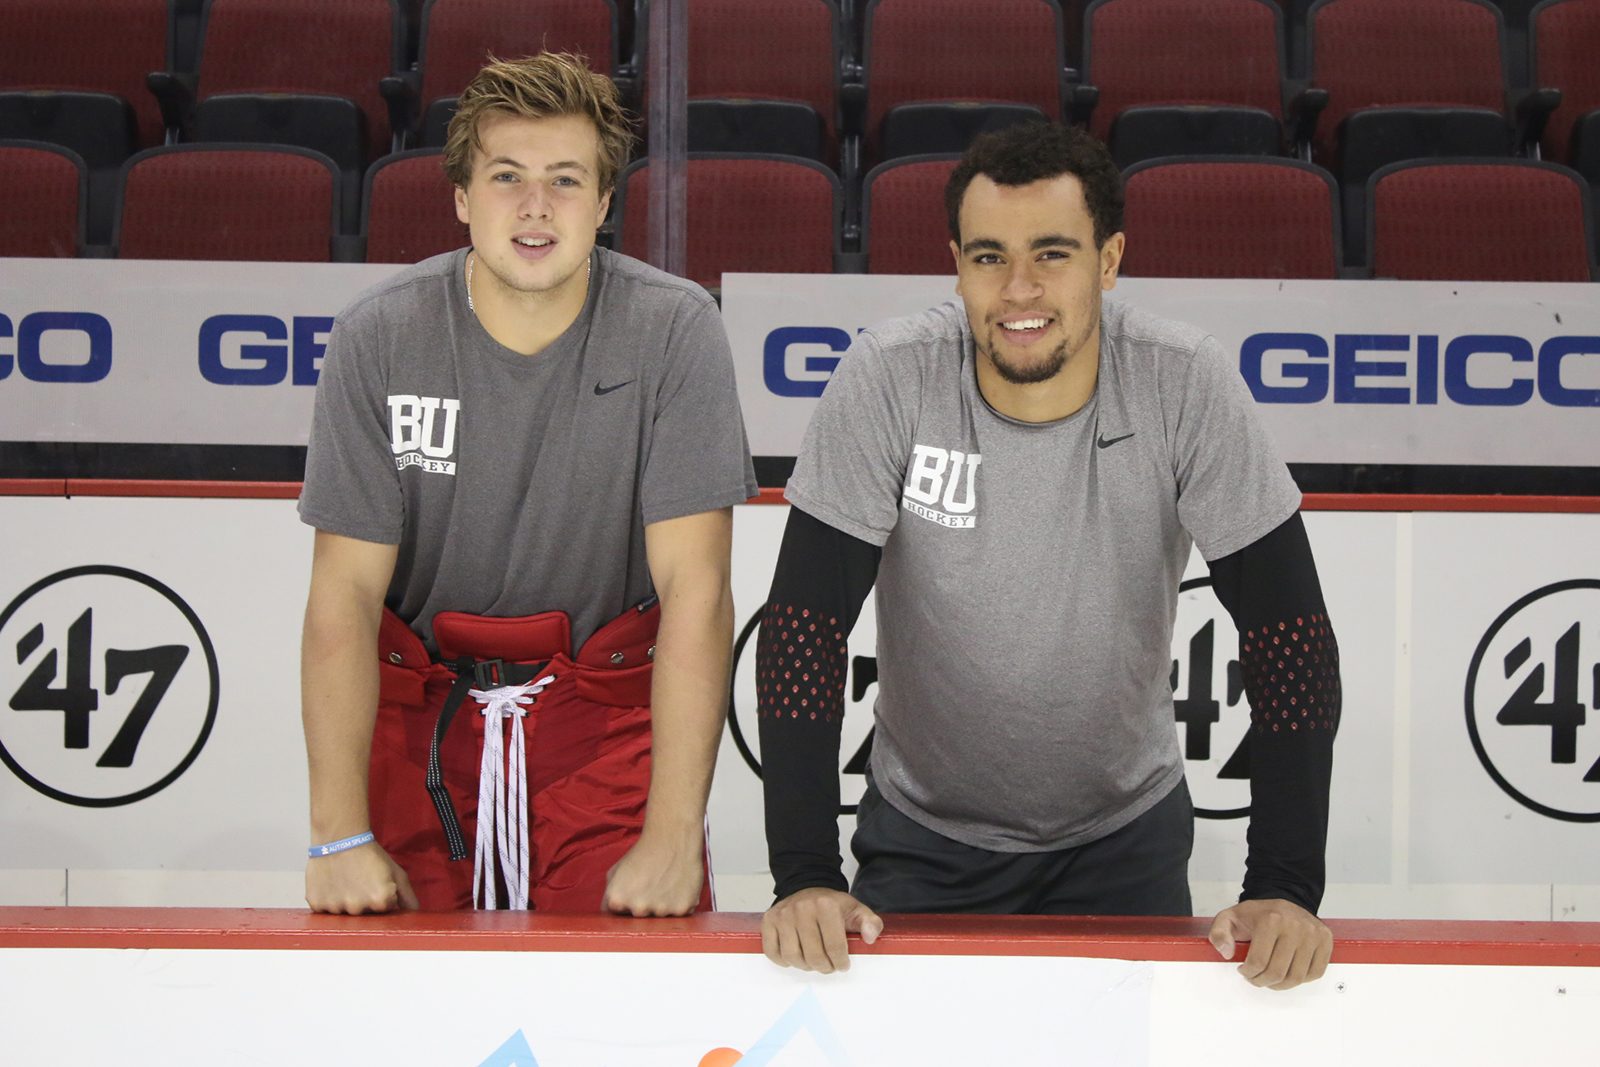 Sophomores Charlie McAvoy and Jordan Greenway bring leadership, skill and a winning attitude to this year's Terriers. PHOTO BY BETSEY GOLDWASSER/ DAILY FREE PRESS STAFF 